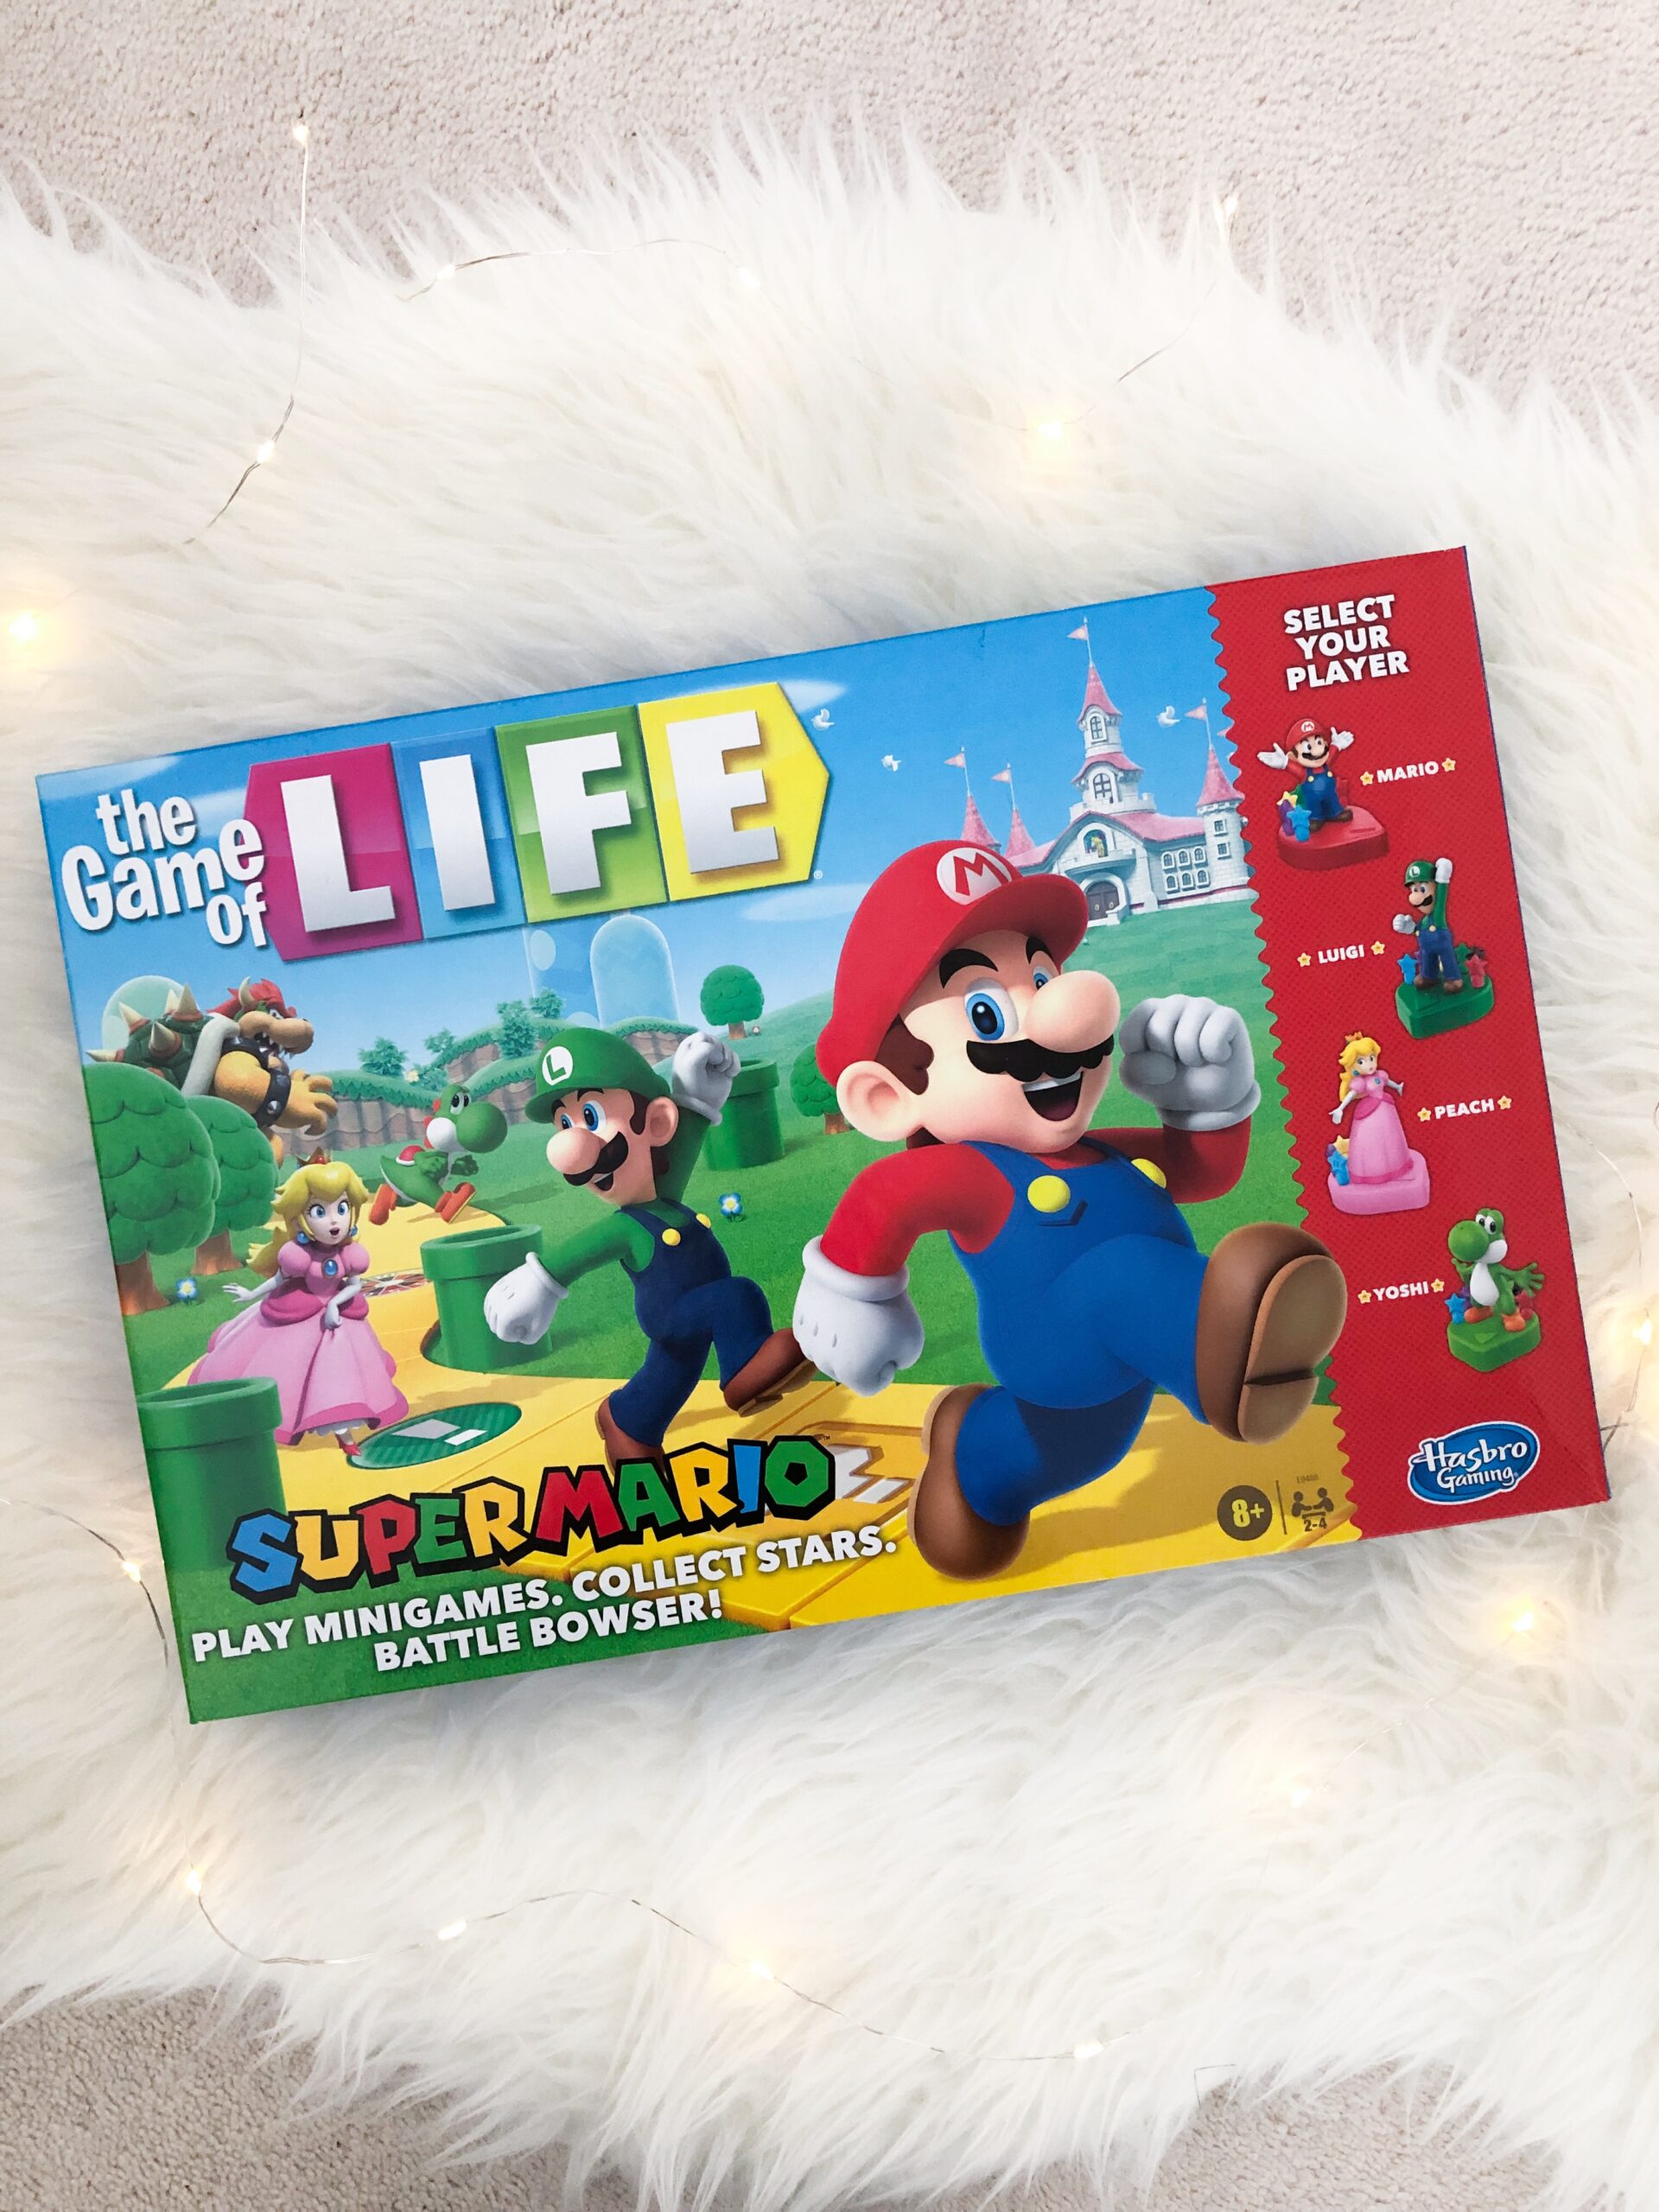 Hasbro Gift Guide for Kids on livin' Life with Style- The game of life: Super Mario